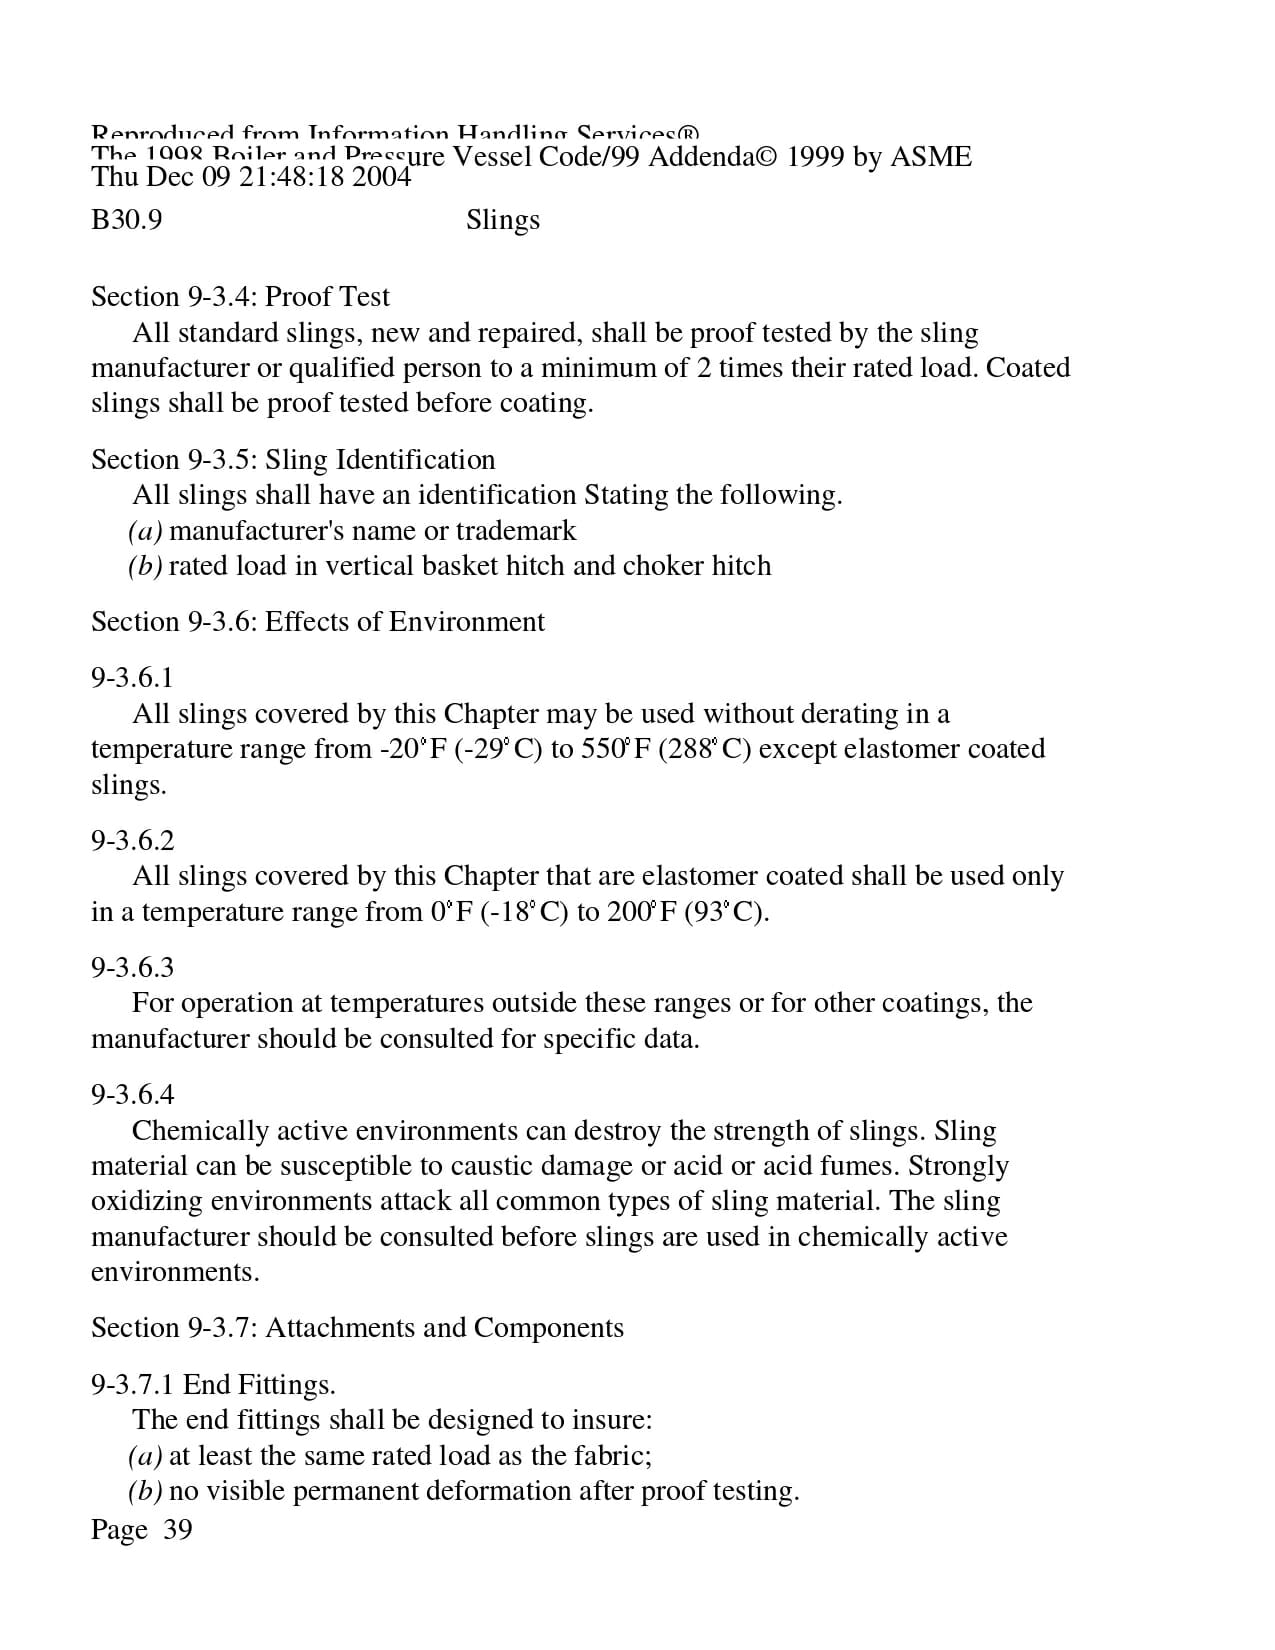 vdocument.in_asme-b309_page-0039